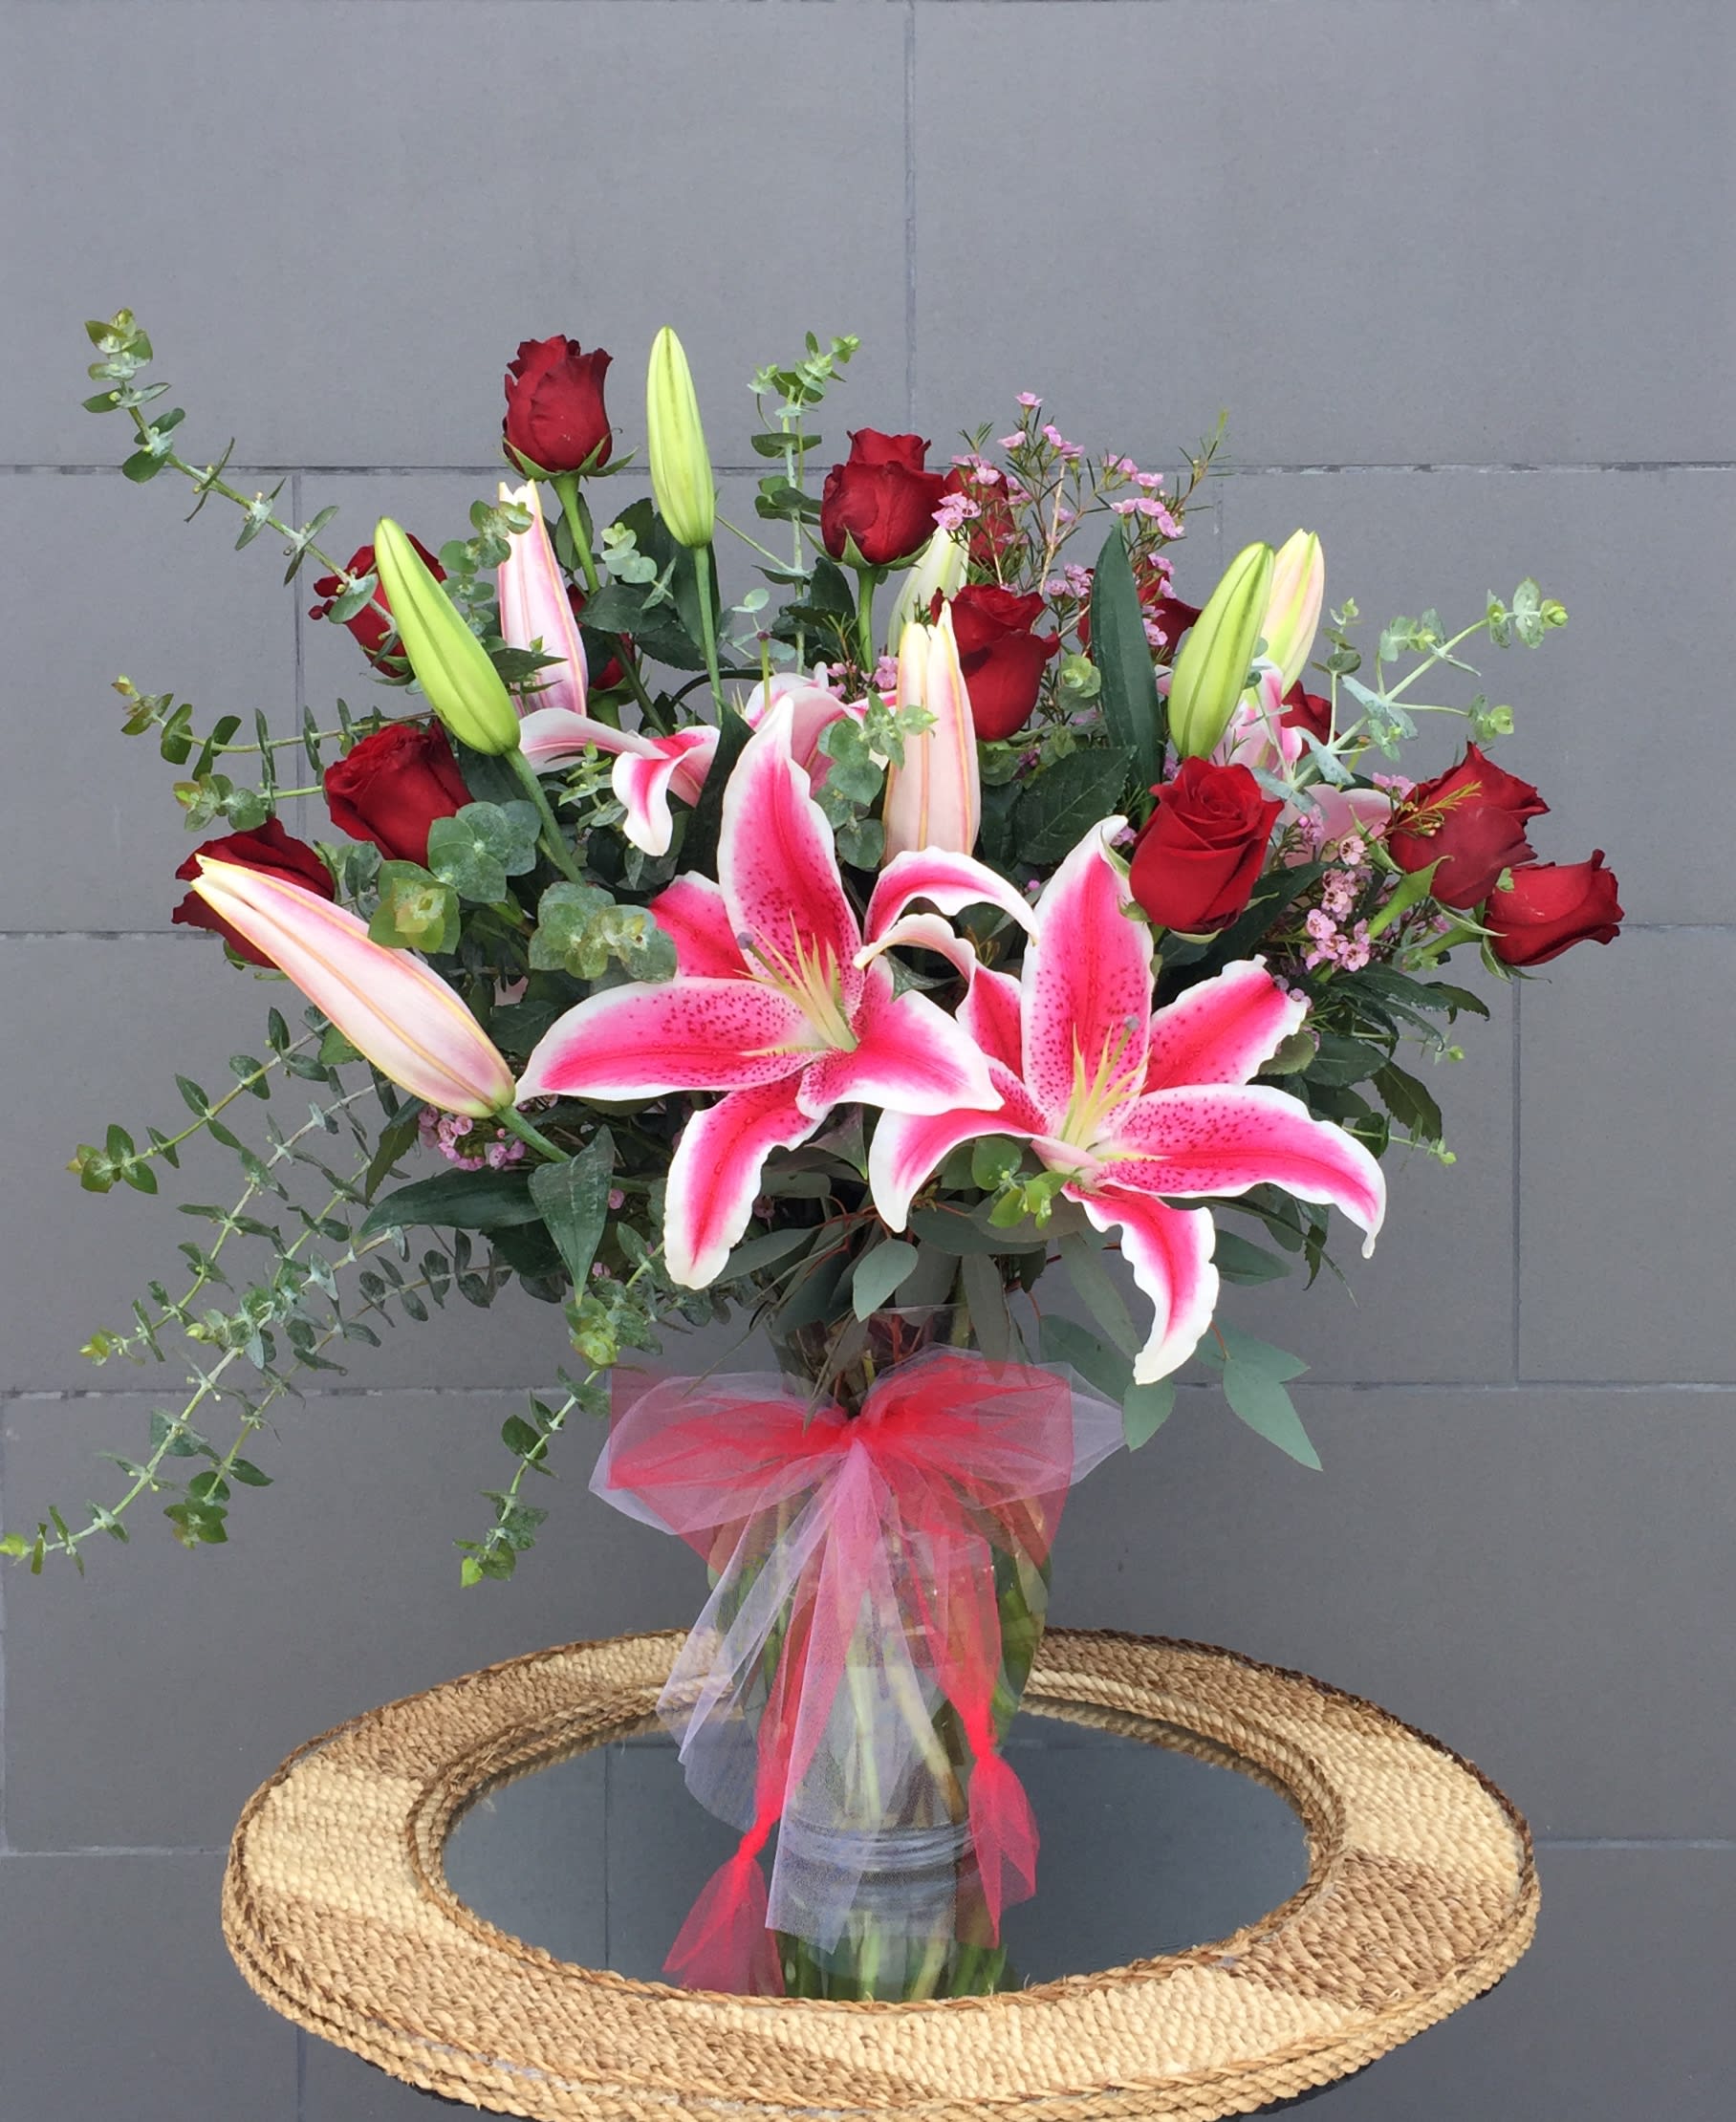 Happy Together - Stargazer lilies, Ecuadorian roses with nice accents in a tall glass vase. CUSTOMER CAN CHOOSE PINK OR WHITE LILY.